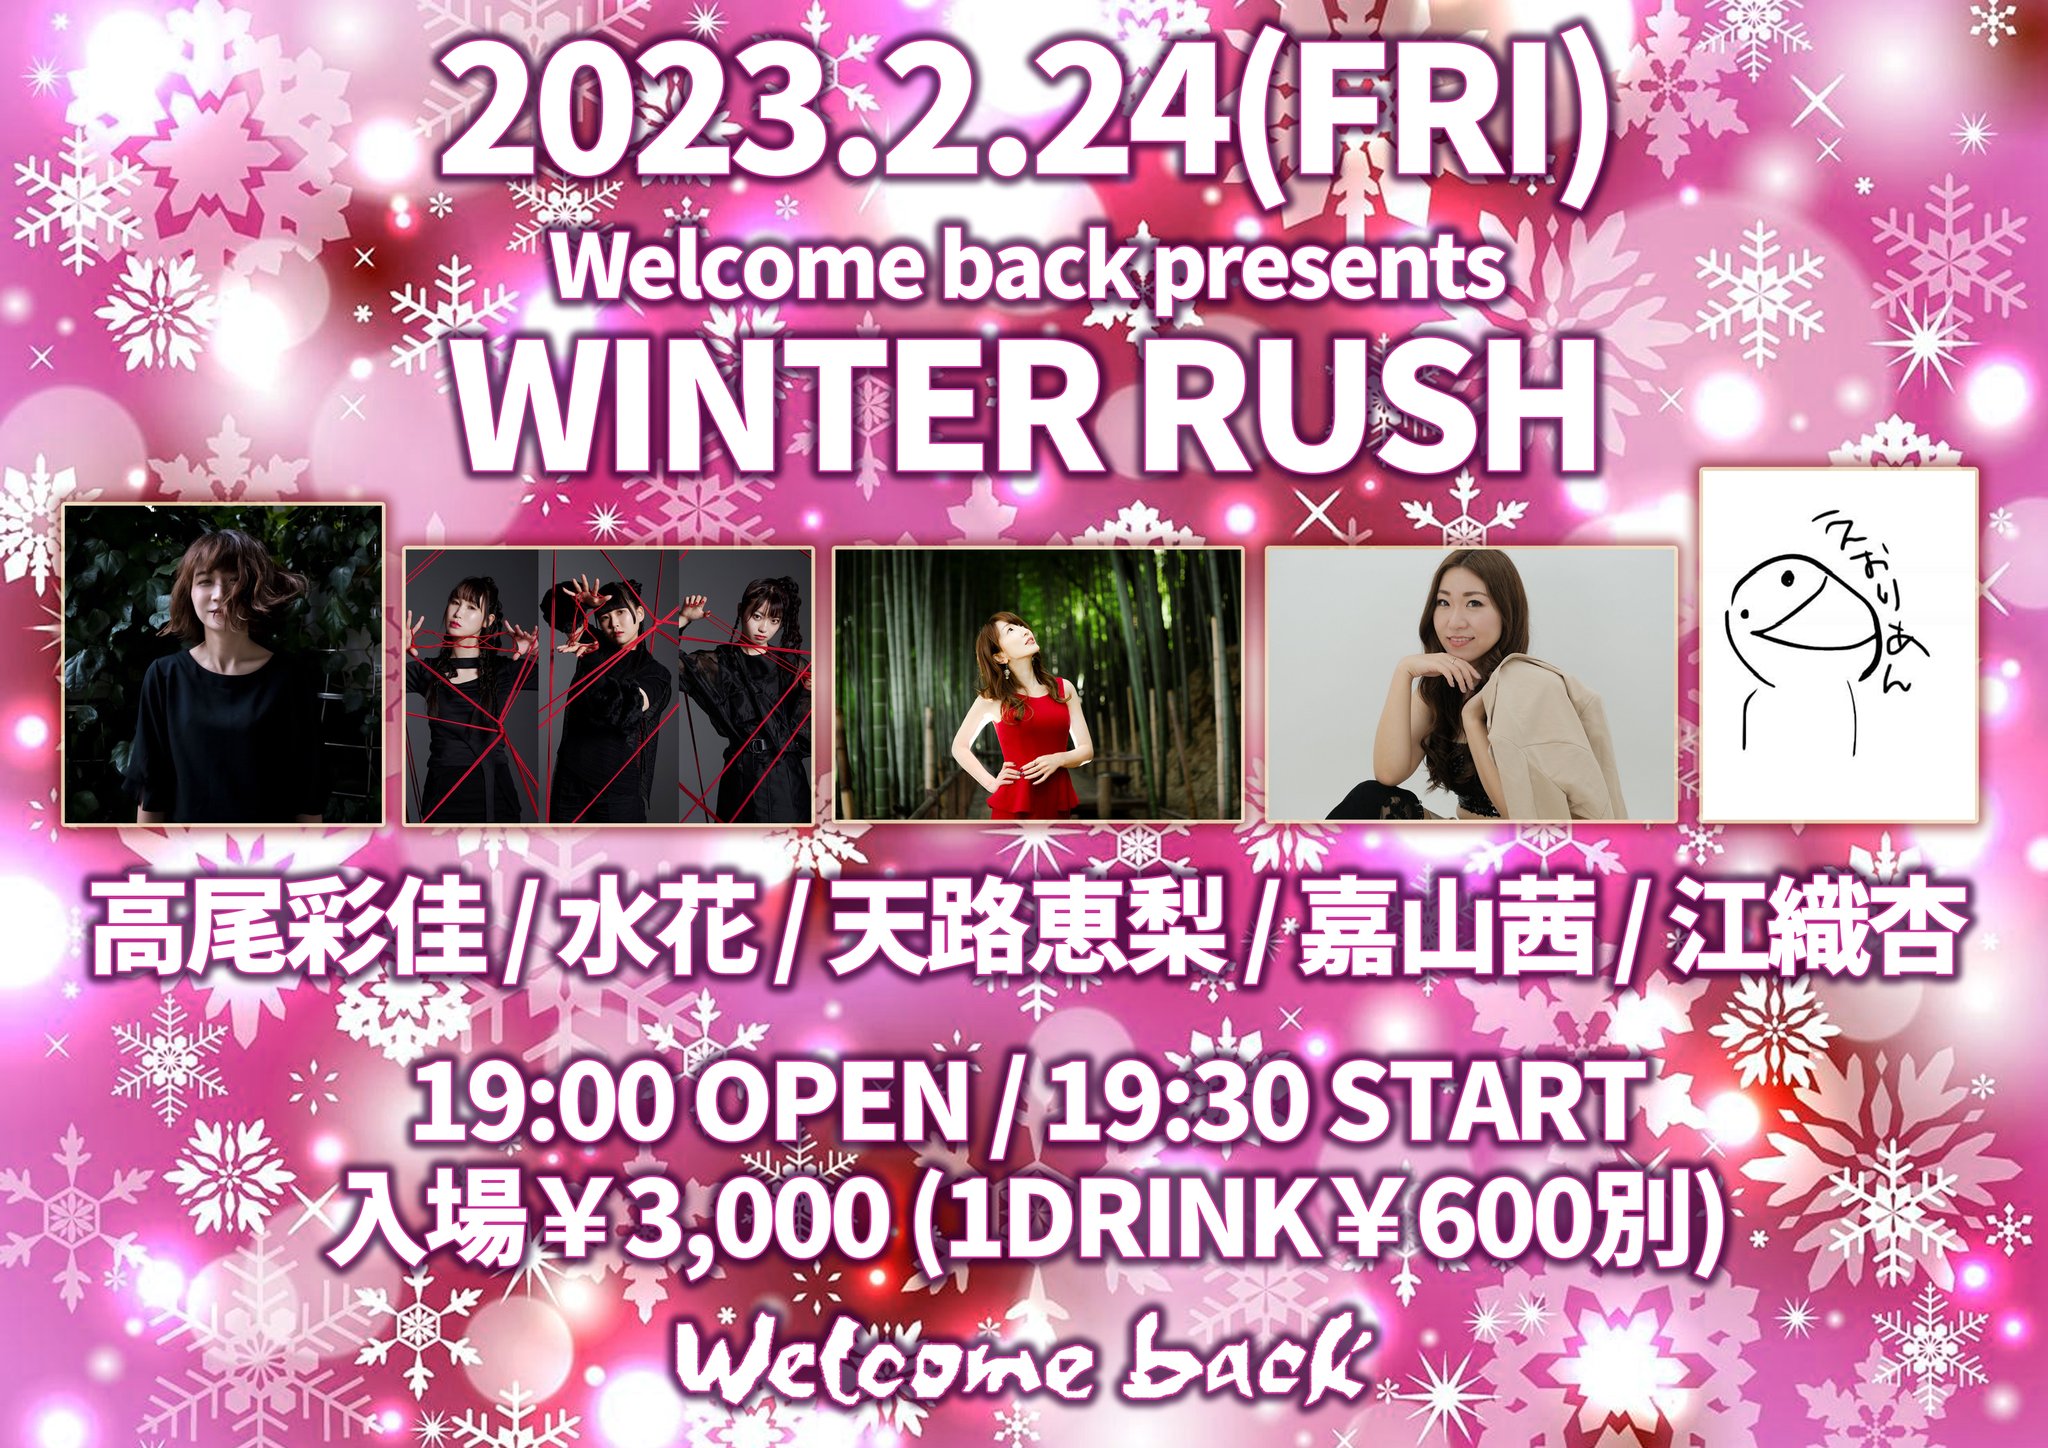 Welcome back presents WINTER RUSH